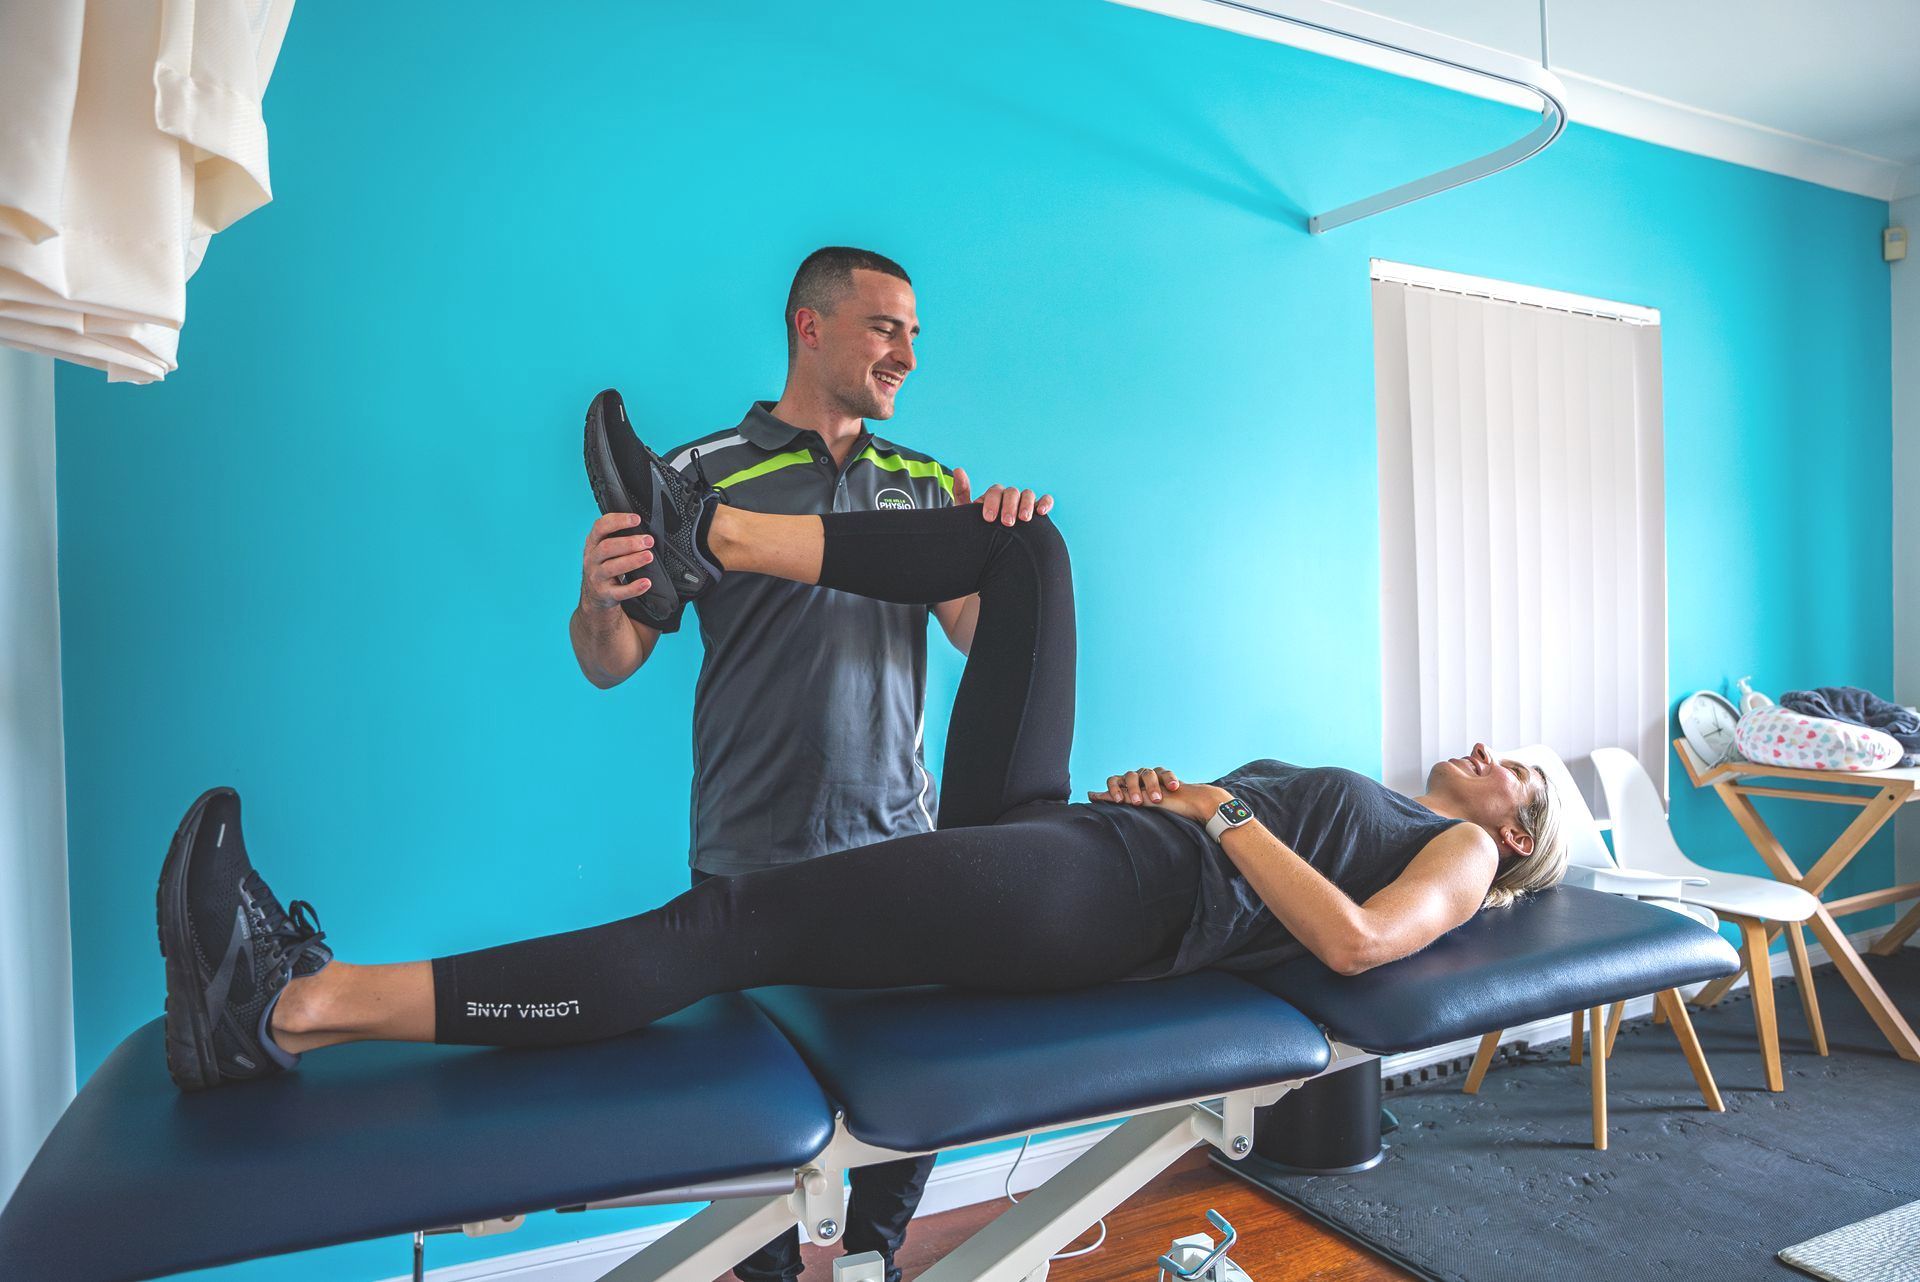 Cyclist sitting on bed with hips being assessed by male physio